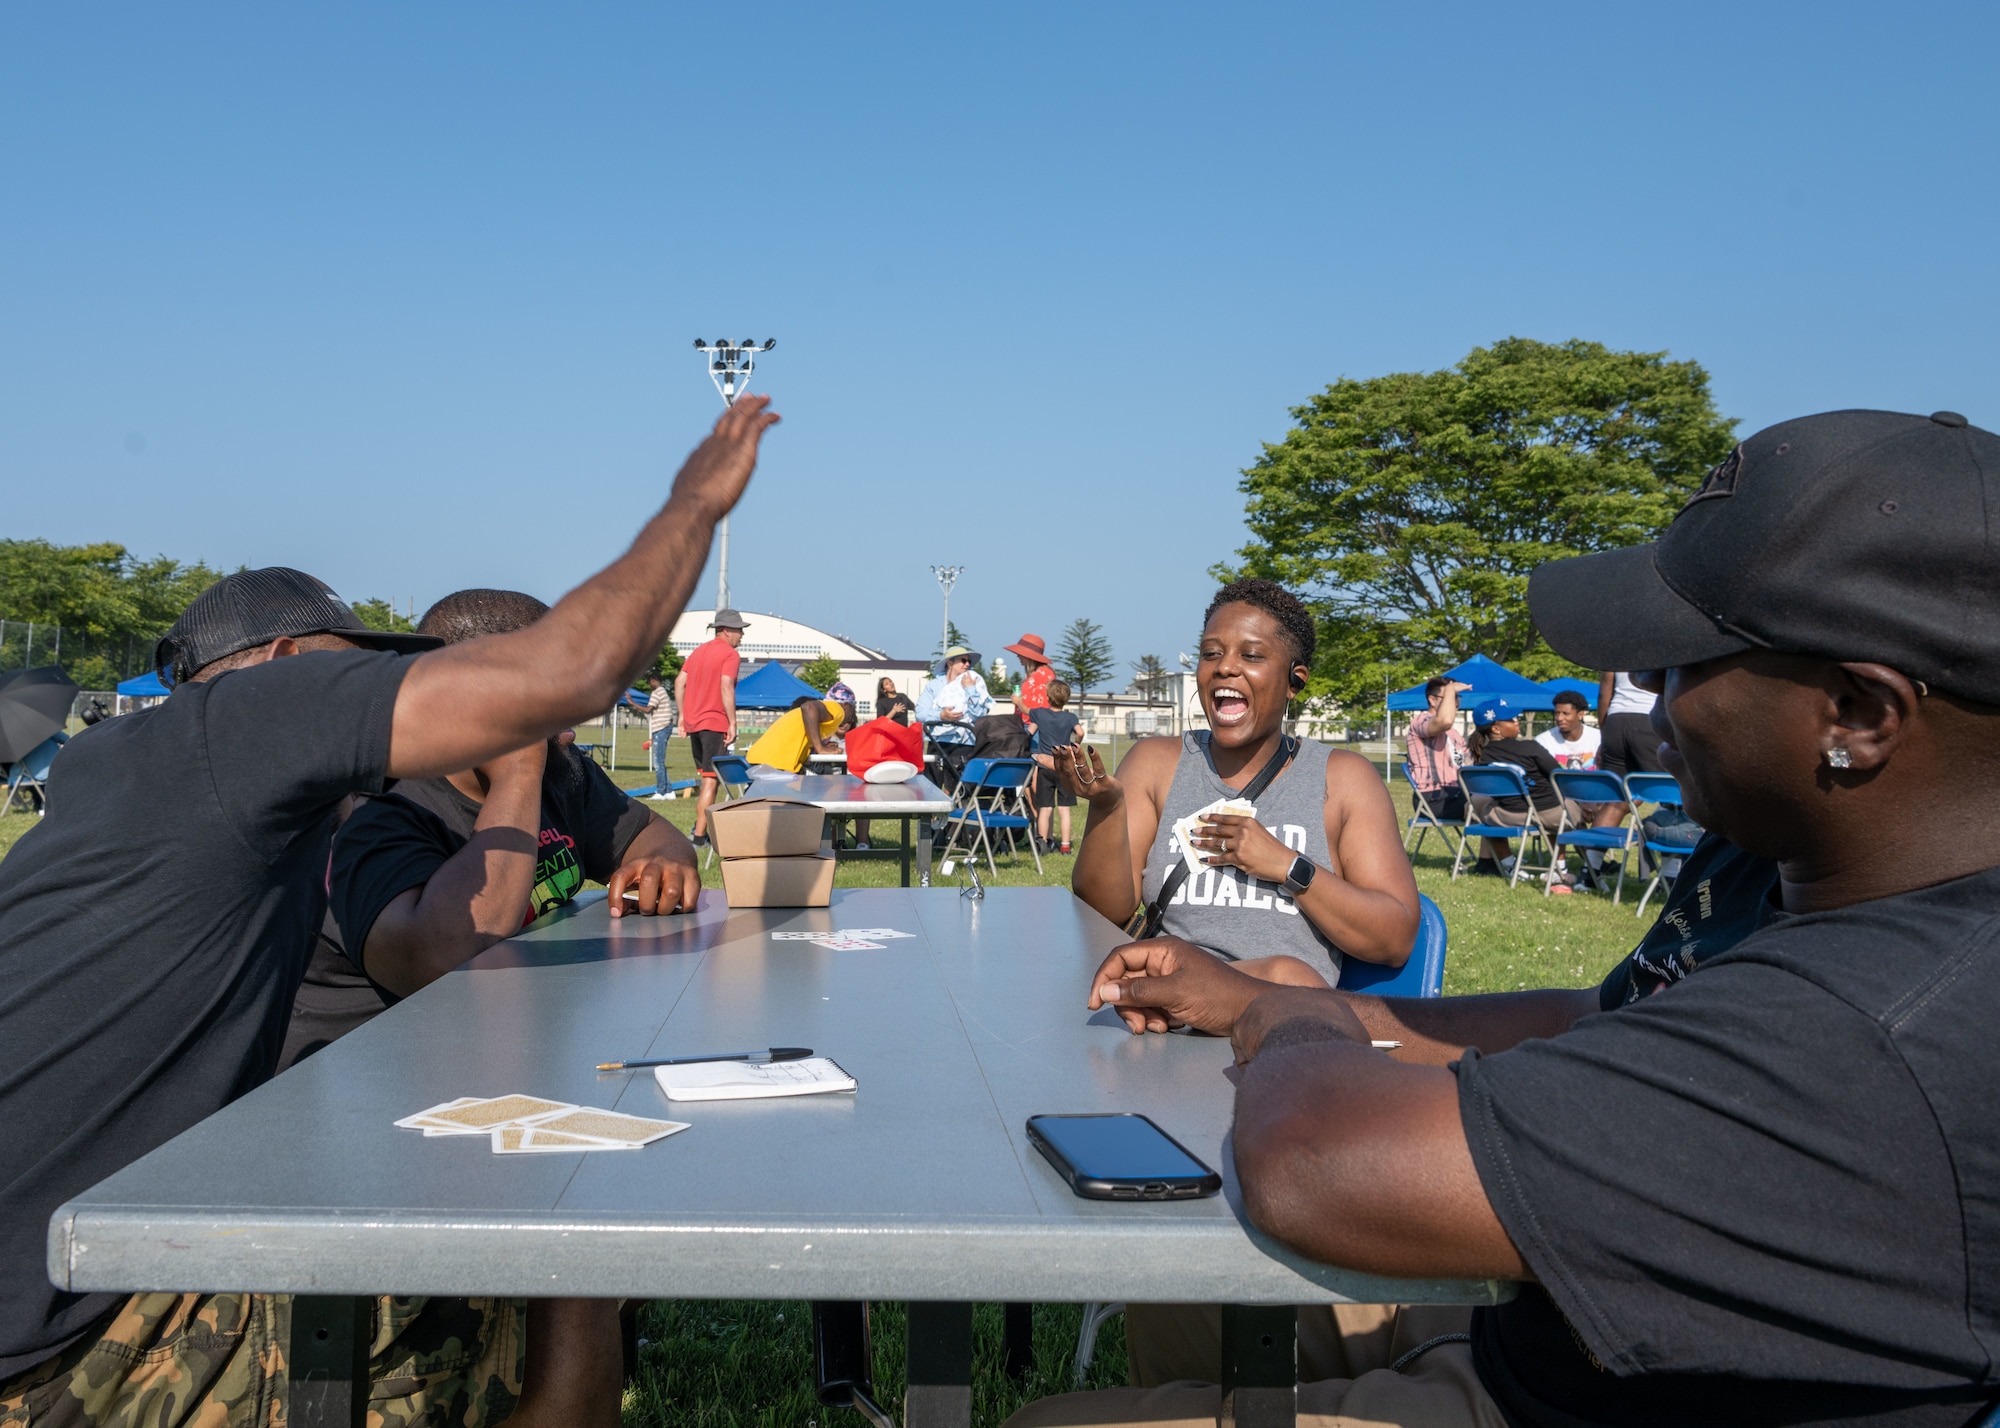 Members from Team Misawa participate in a spades tournament during the Juneteenth Family Reunion event at Misawa Air Base, Japan, June 18, 2022.